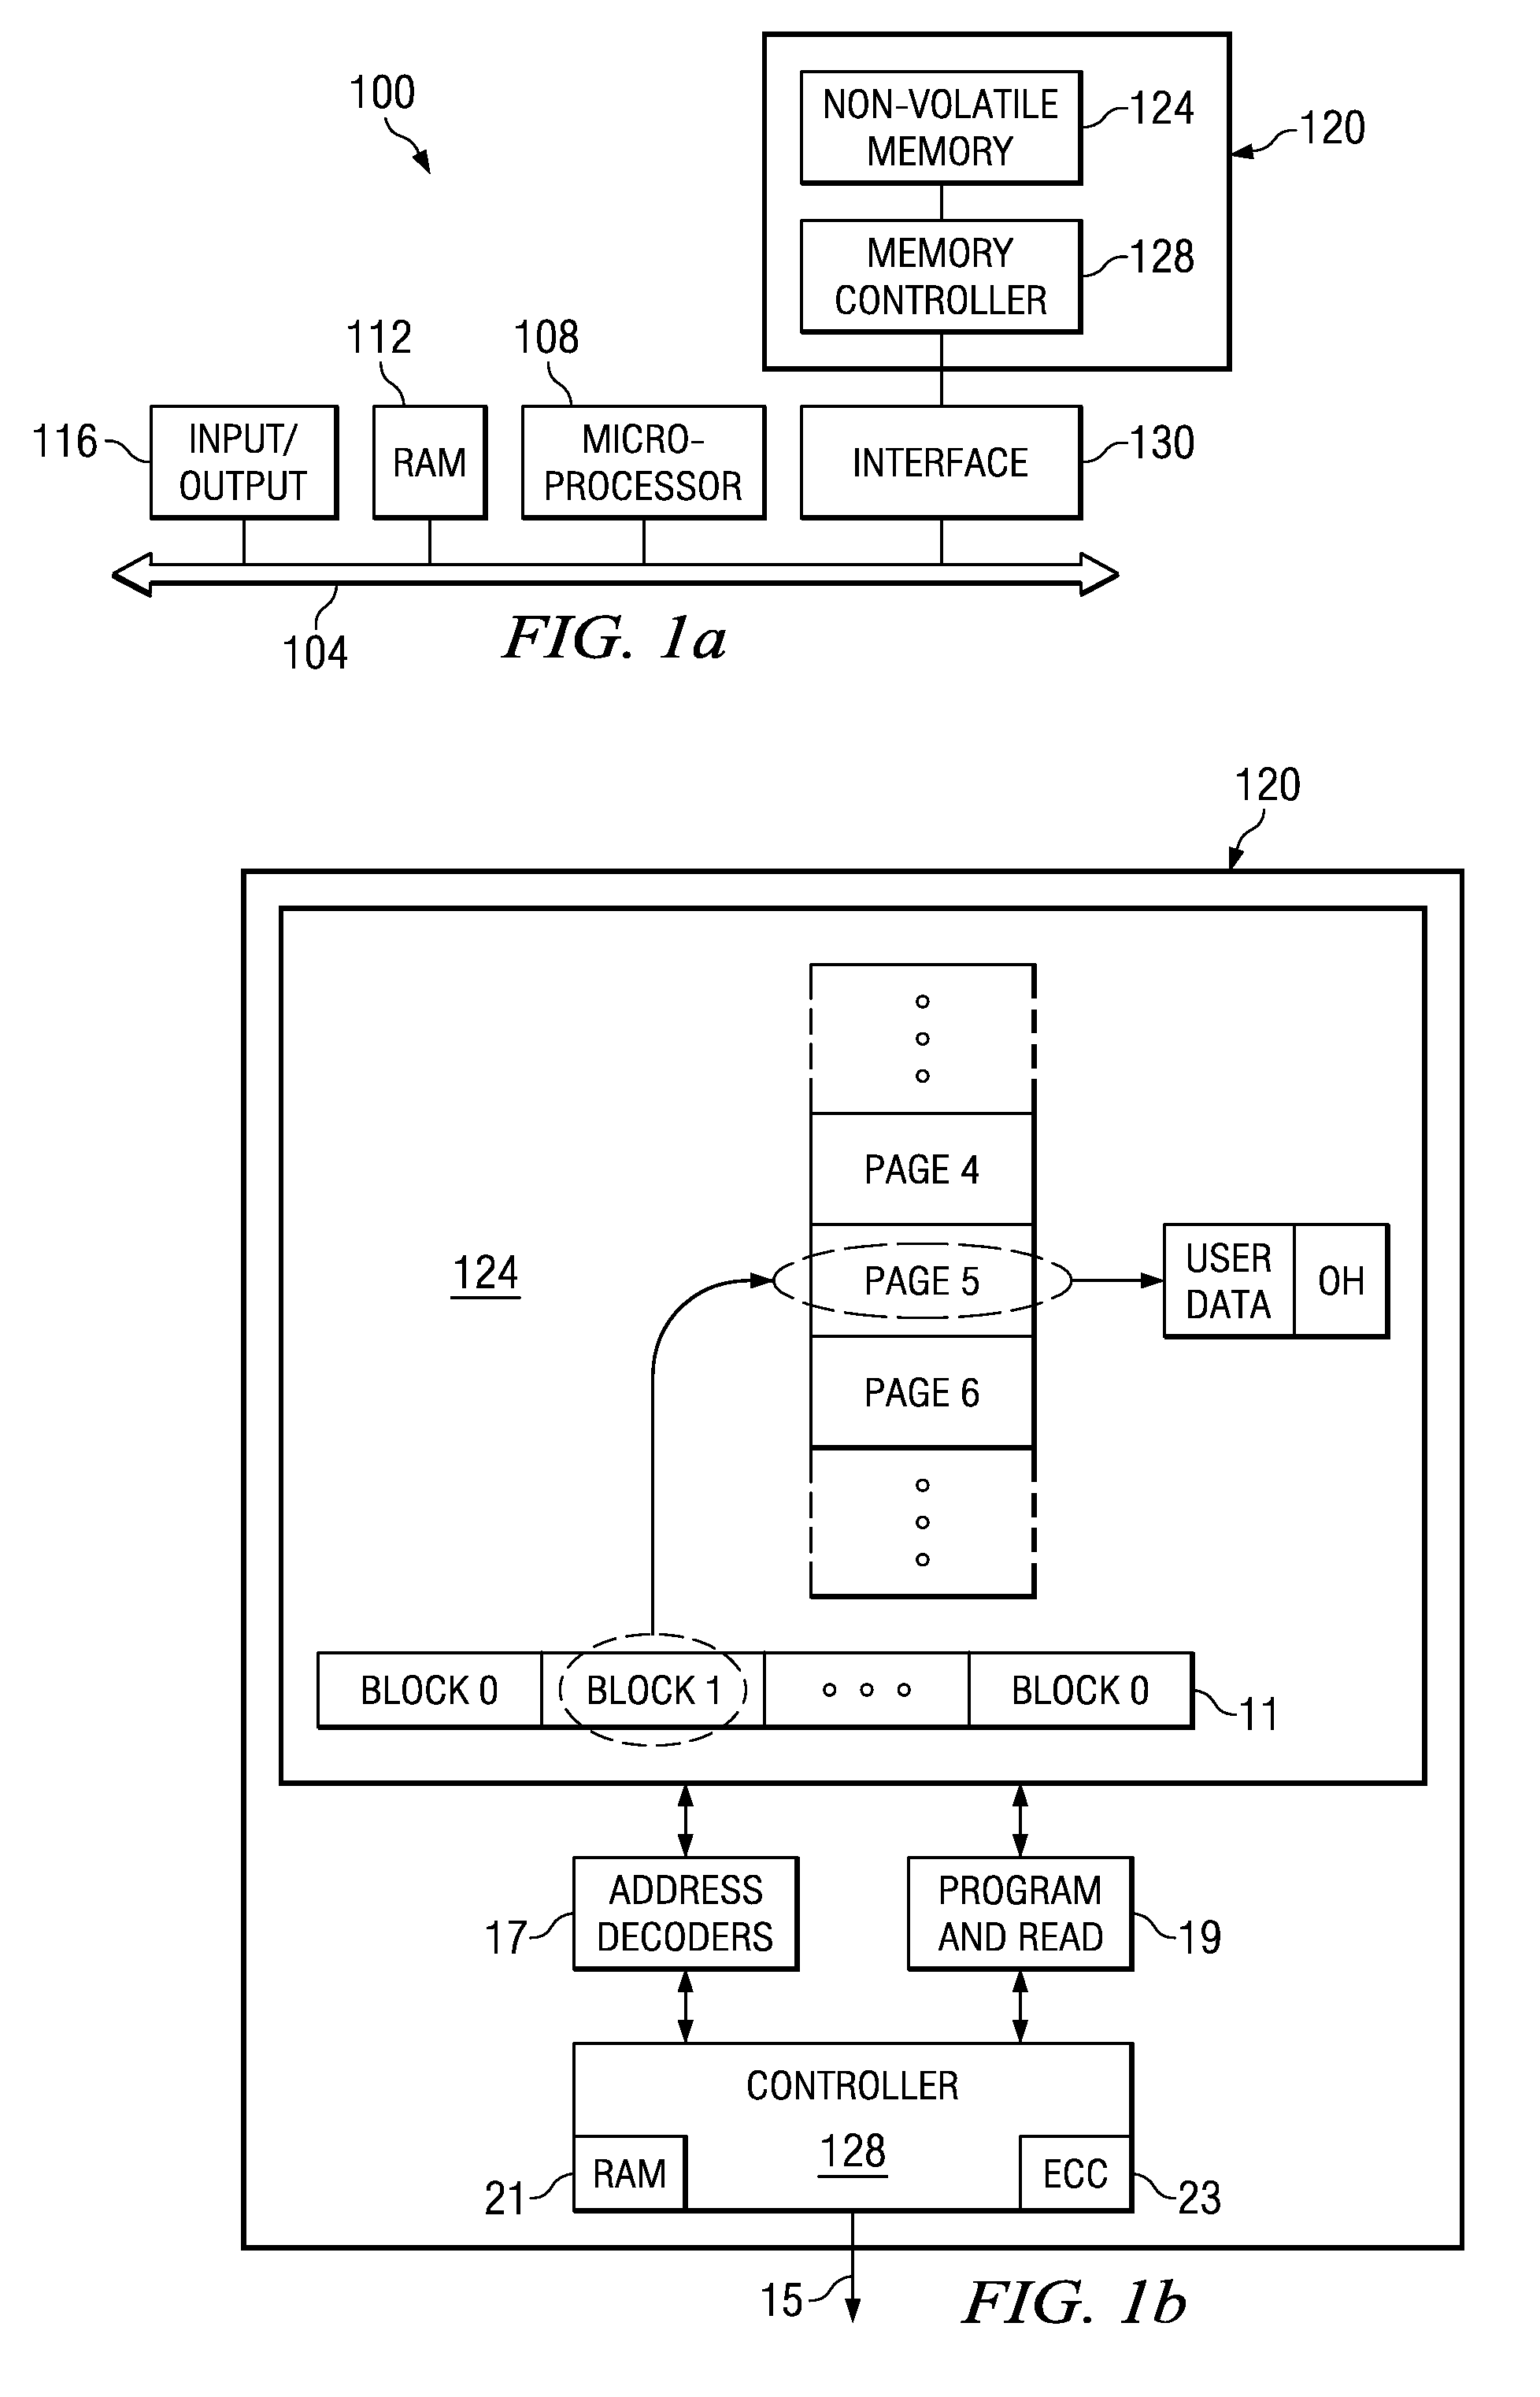 Hybrid Mapping Implementation Within a Non-Volatile Memory System